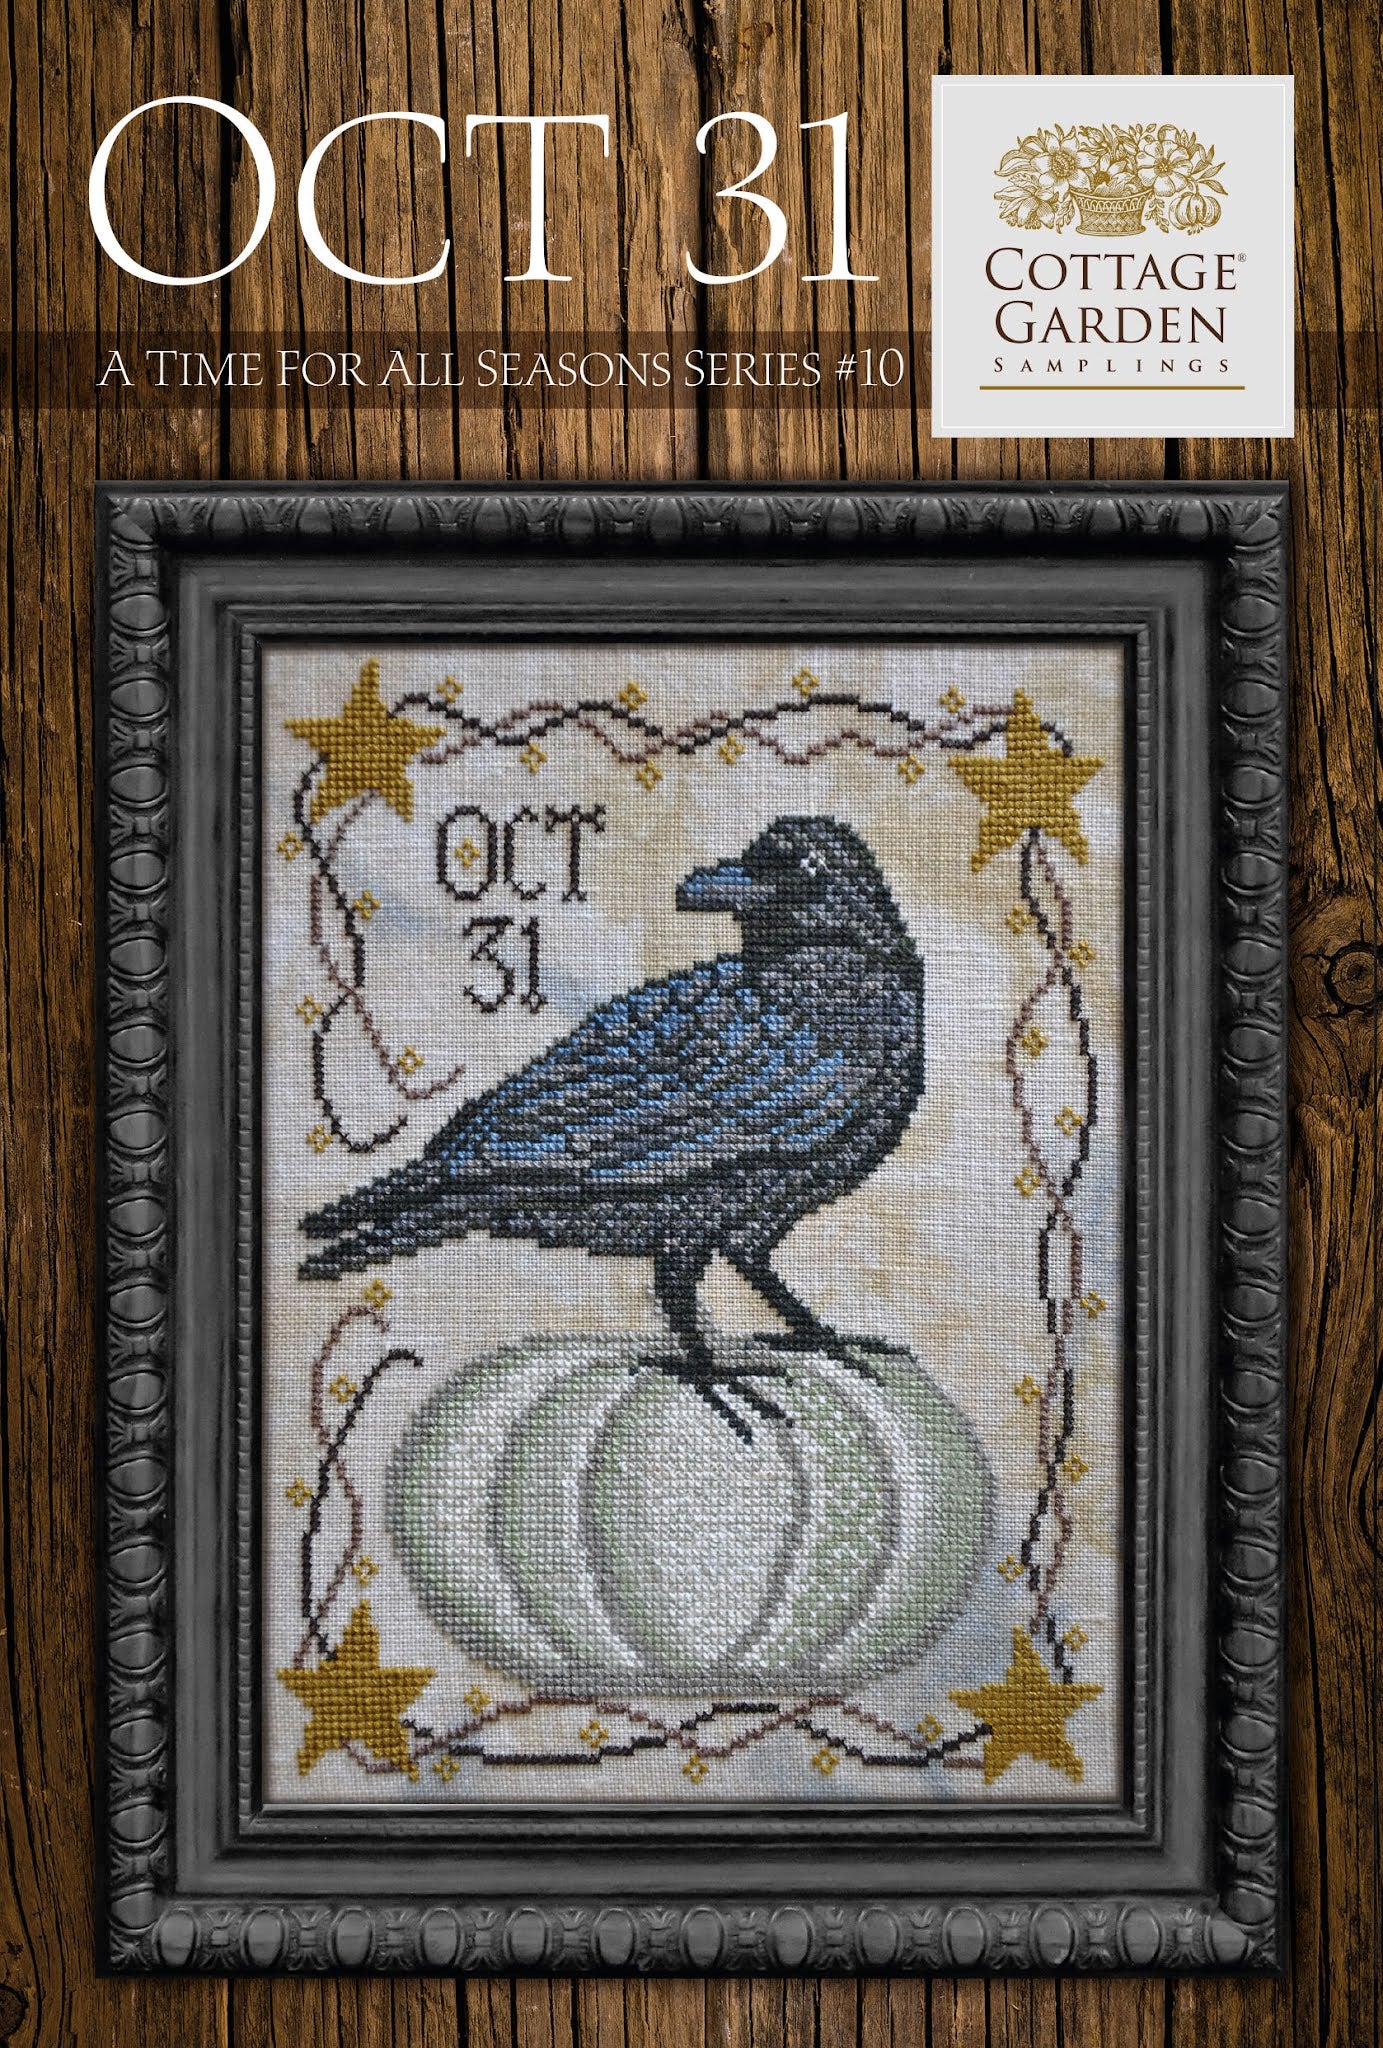 Time for All Seasons 10 - Oct 31 - Cross Stitch Pattern by Cottage Garden Samplings